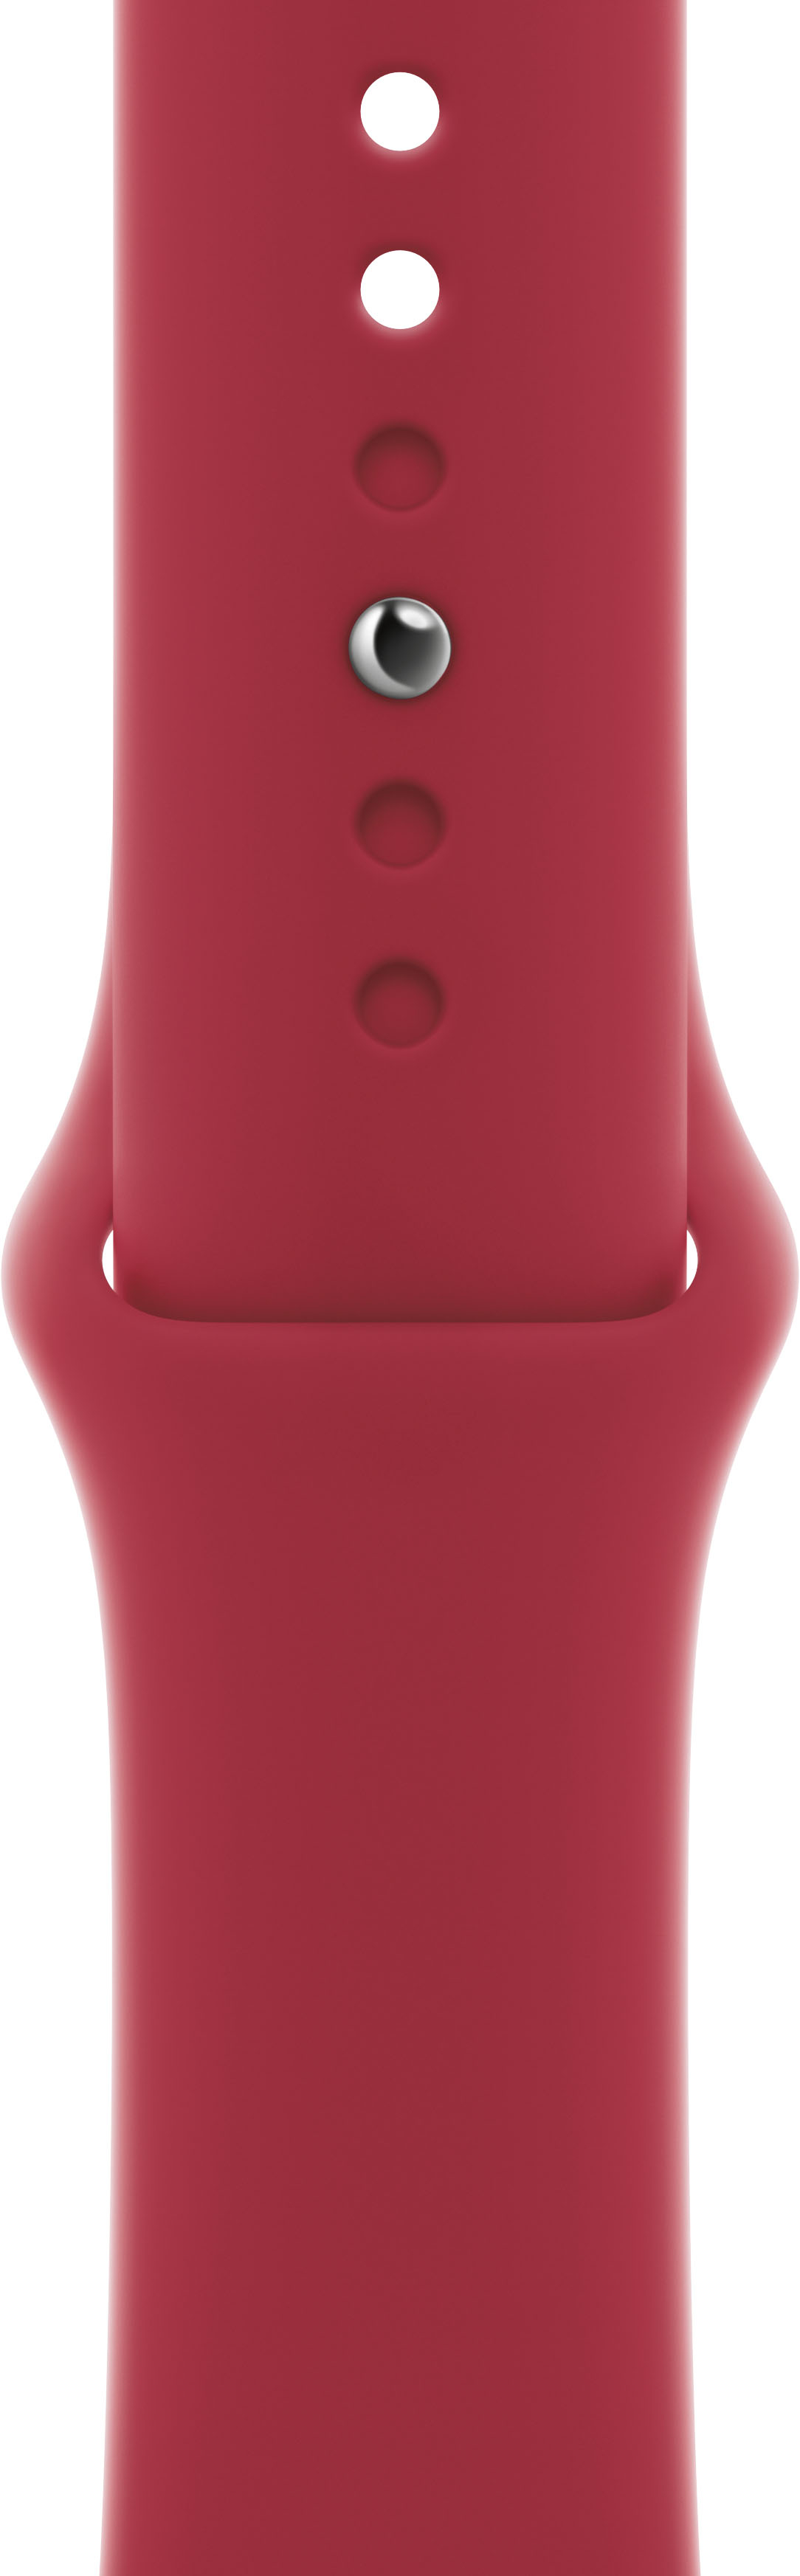 MKUD3AM/A Band for (PRODUCT)RED Sport Watch™ Apple Best - 41mm Buy